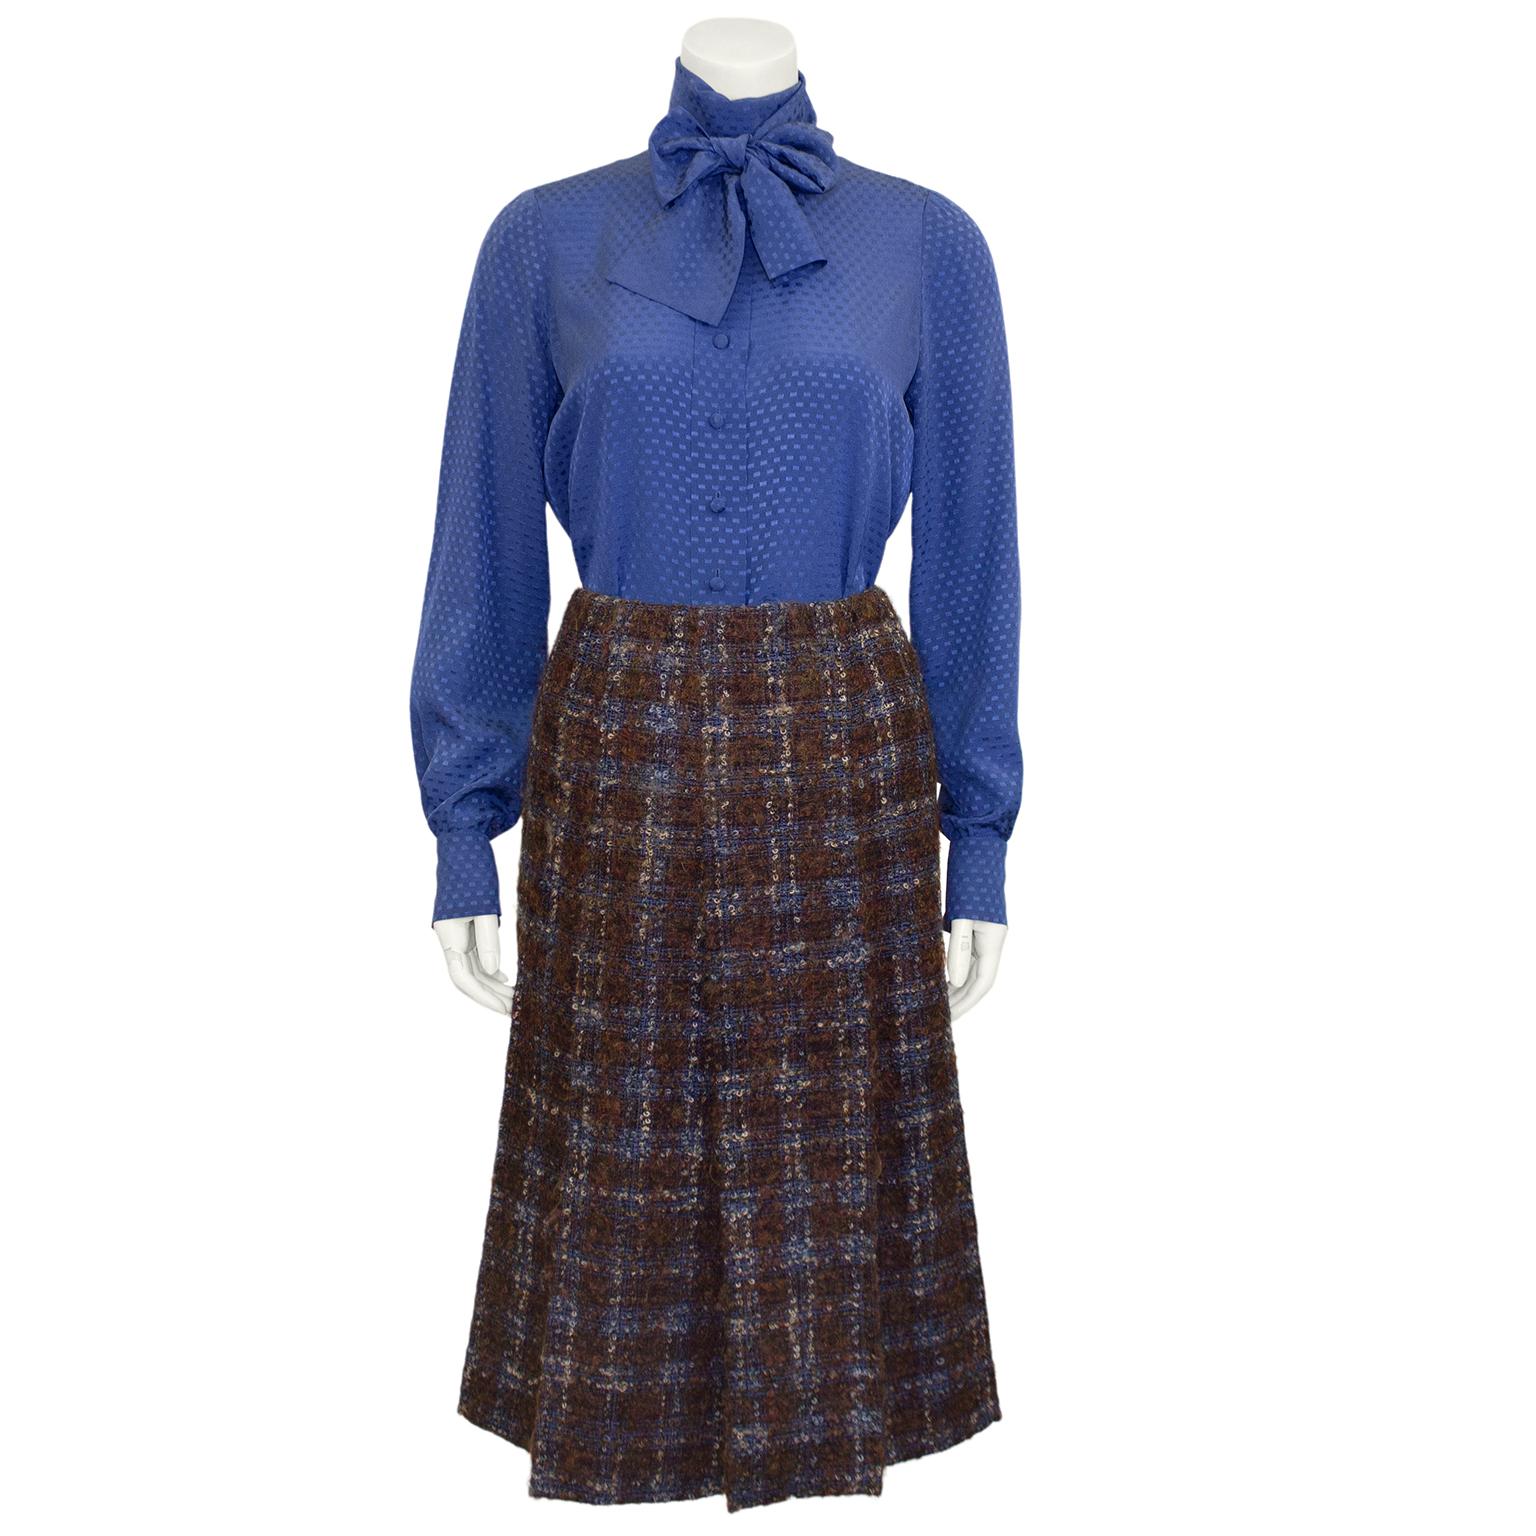 1981 Chanel Haute Couture Blue and Brown Tweed 5 Piece Skirt Suit 1